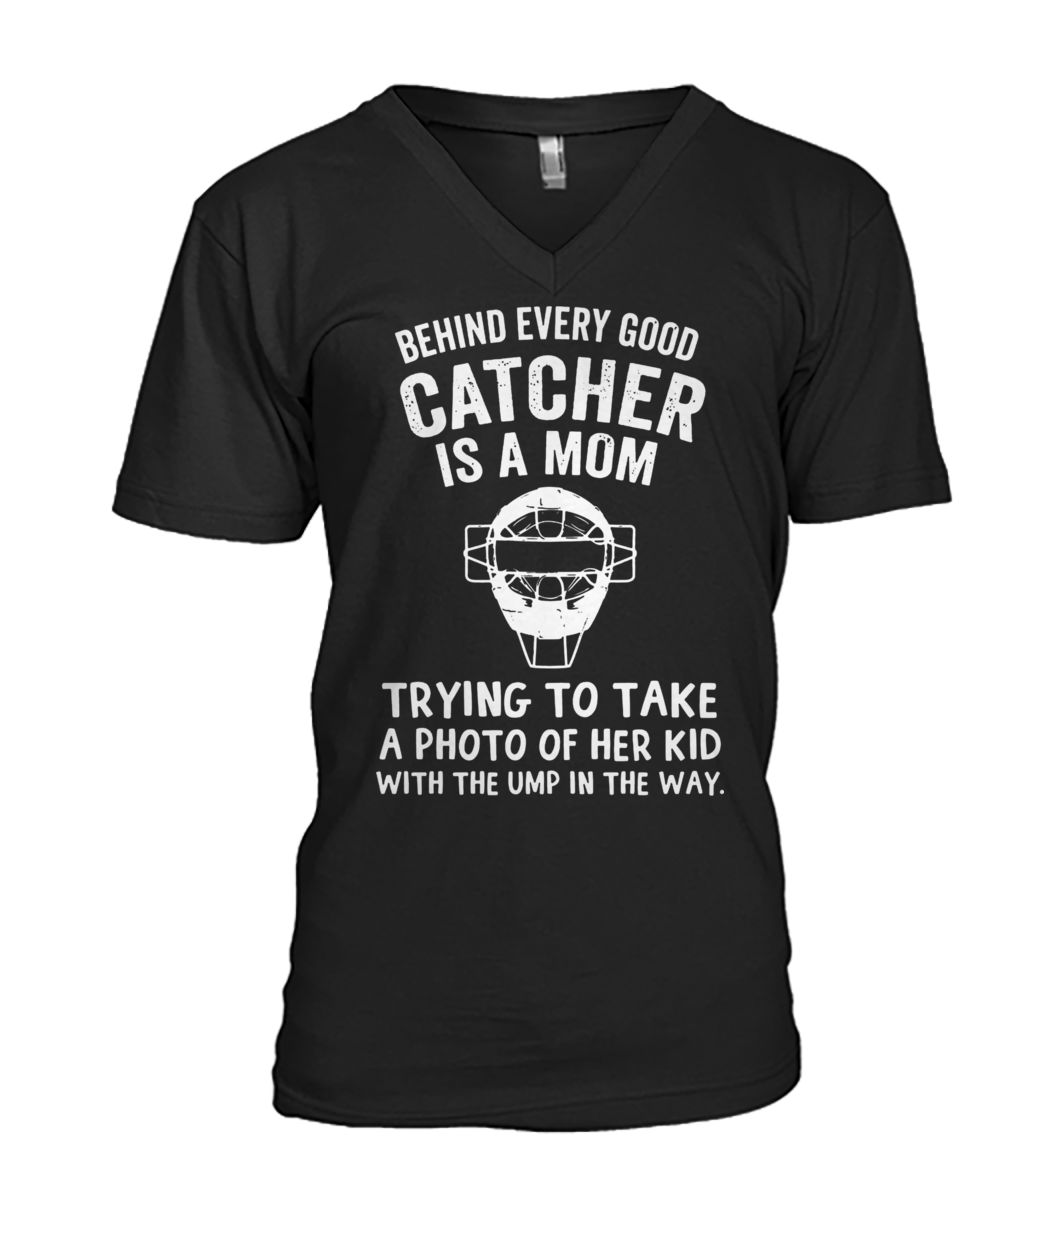 Behind every good catcher is a mom trying to take a photo of her kid with the ump in the way mens v-neck